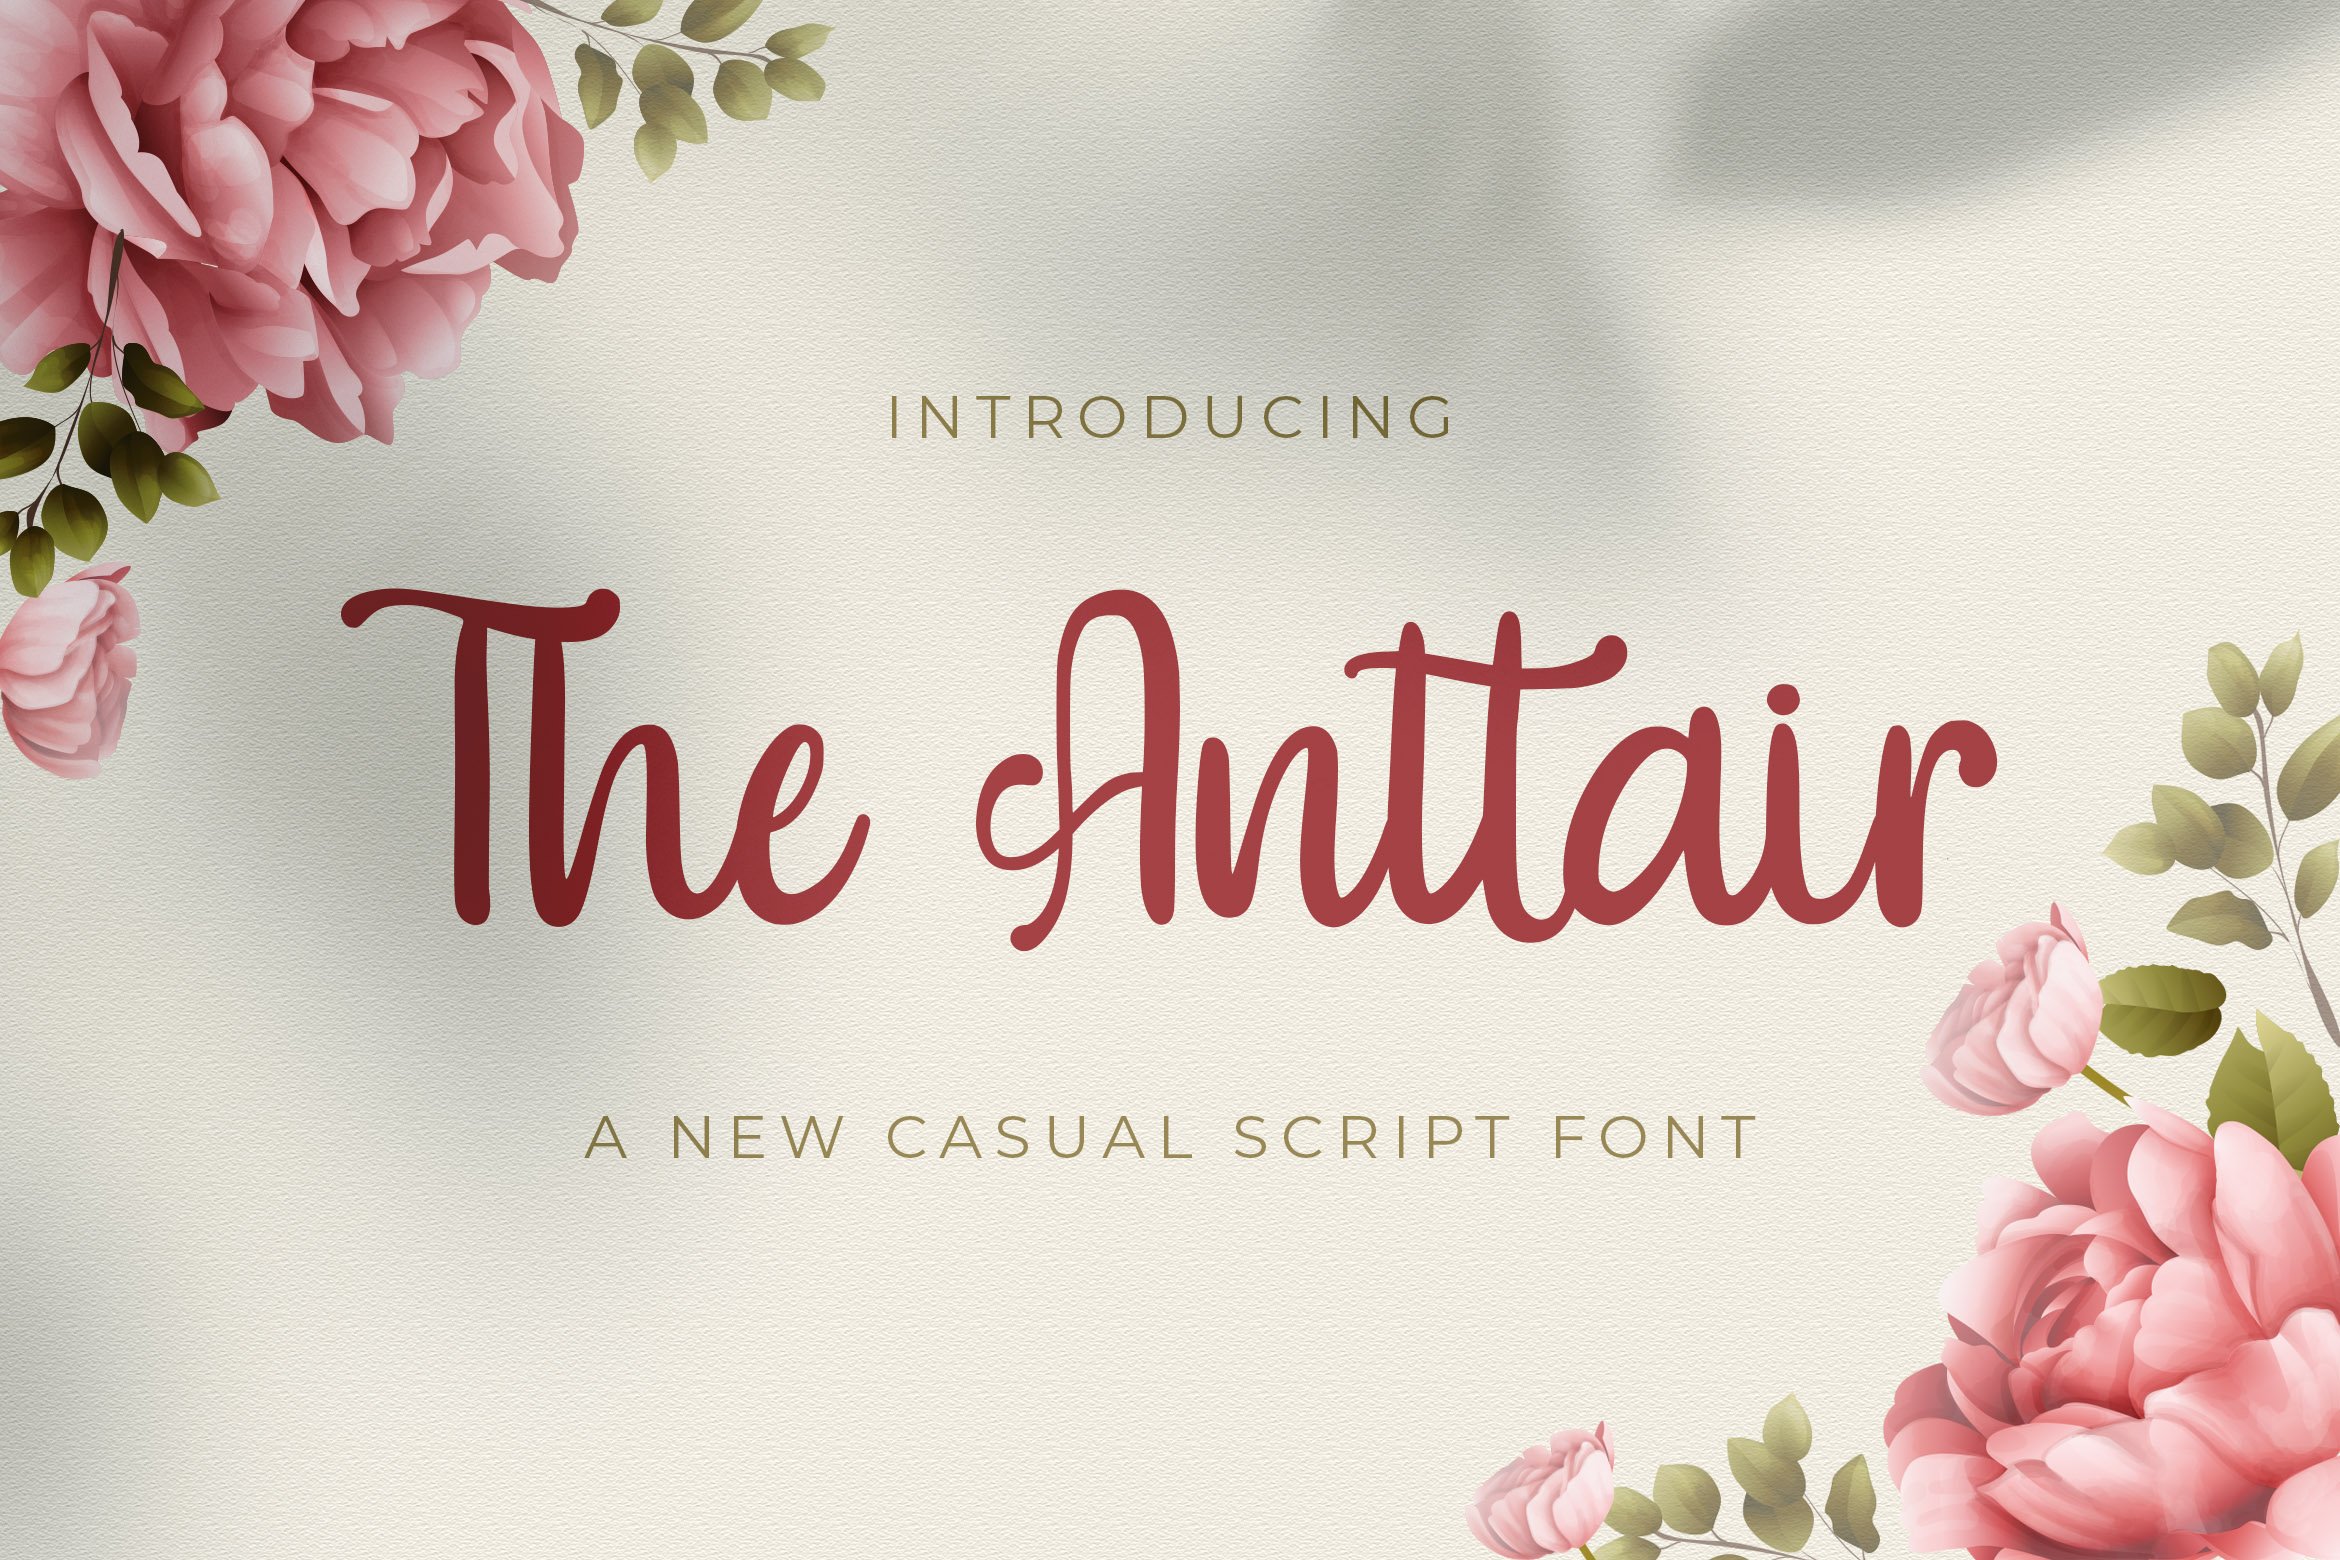 The Anttair - Handwritten Font cover image.